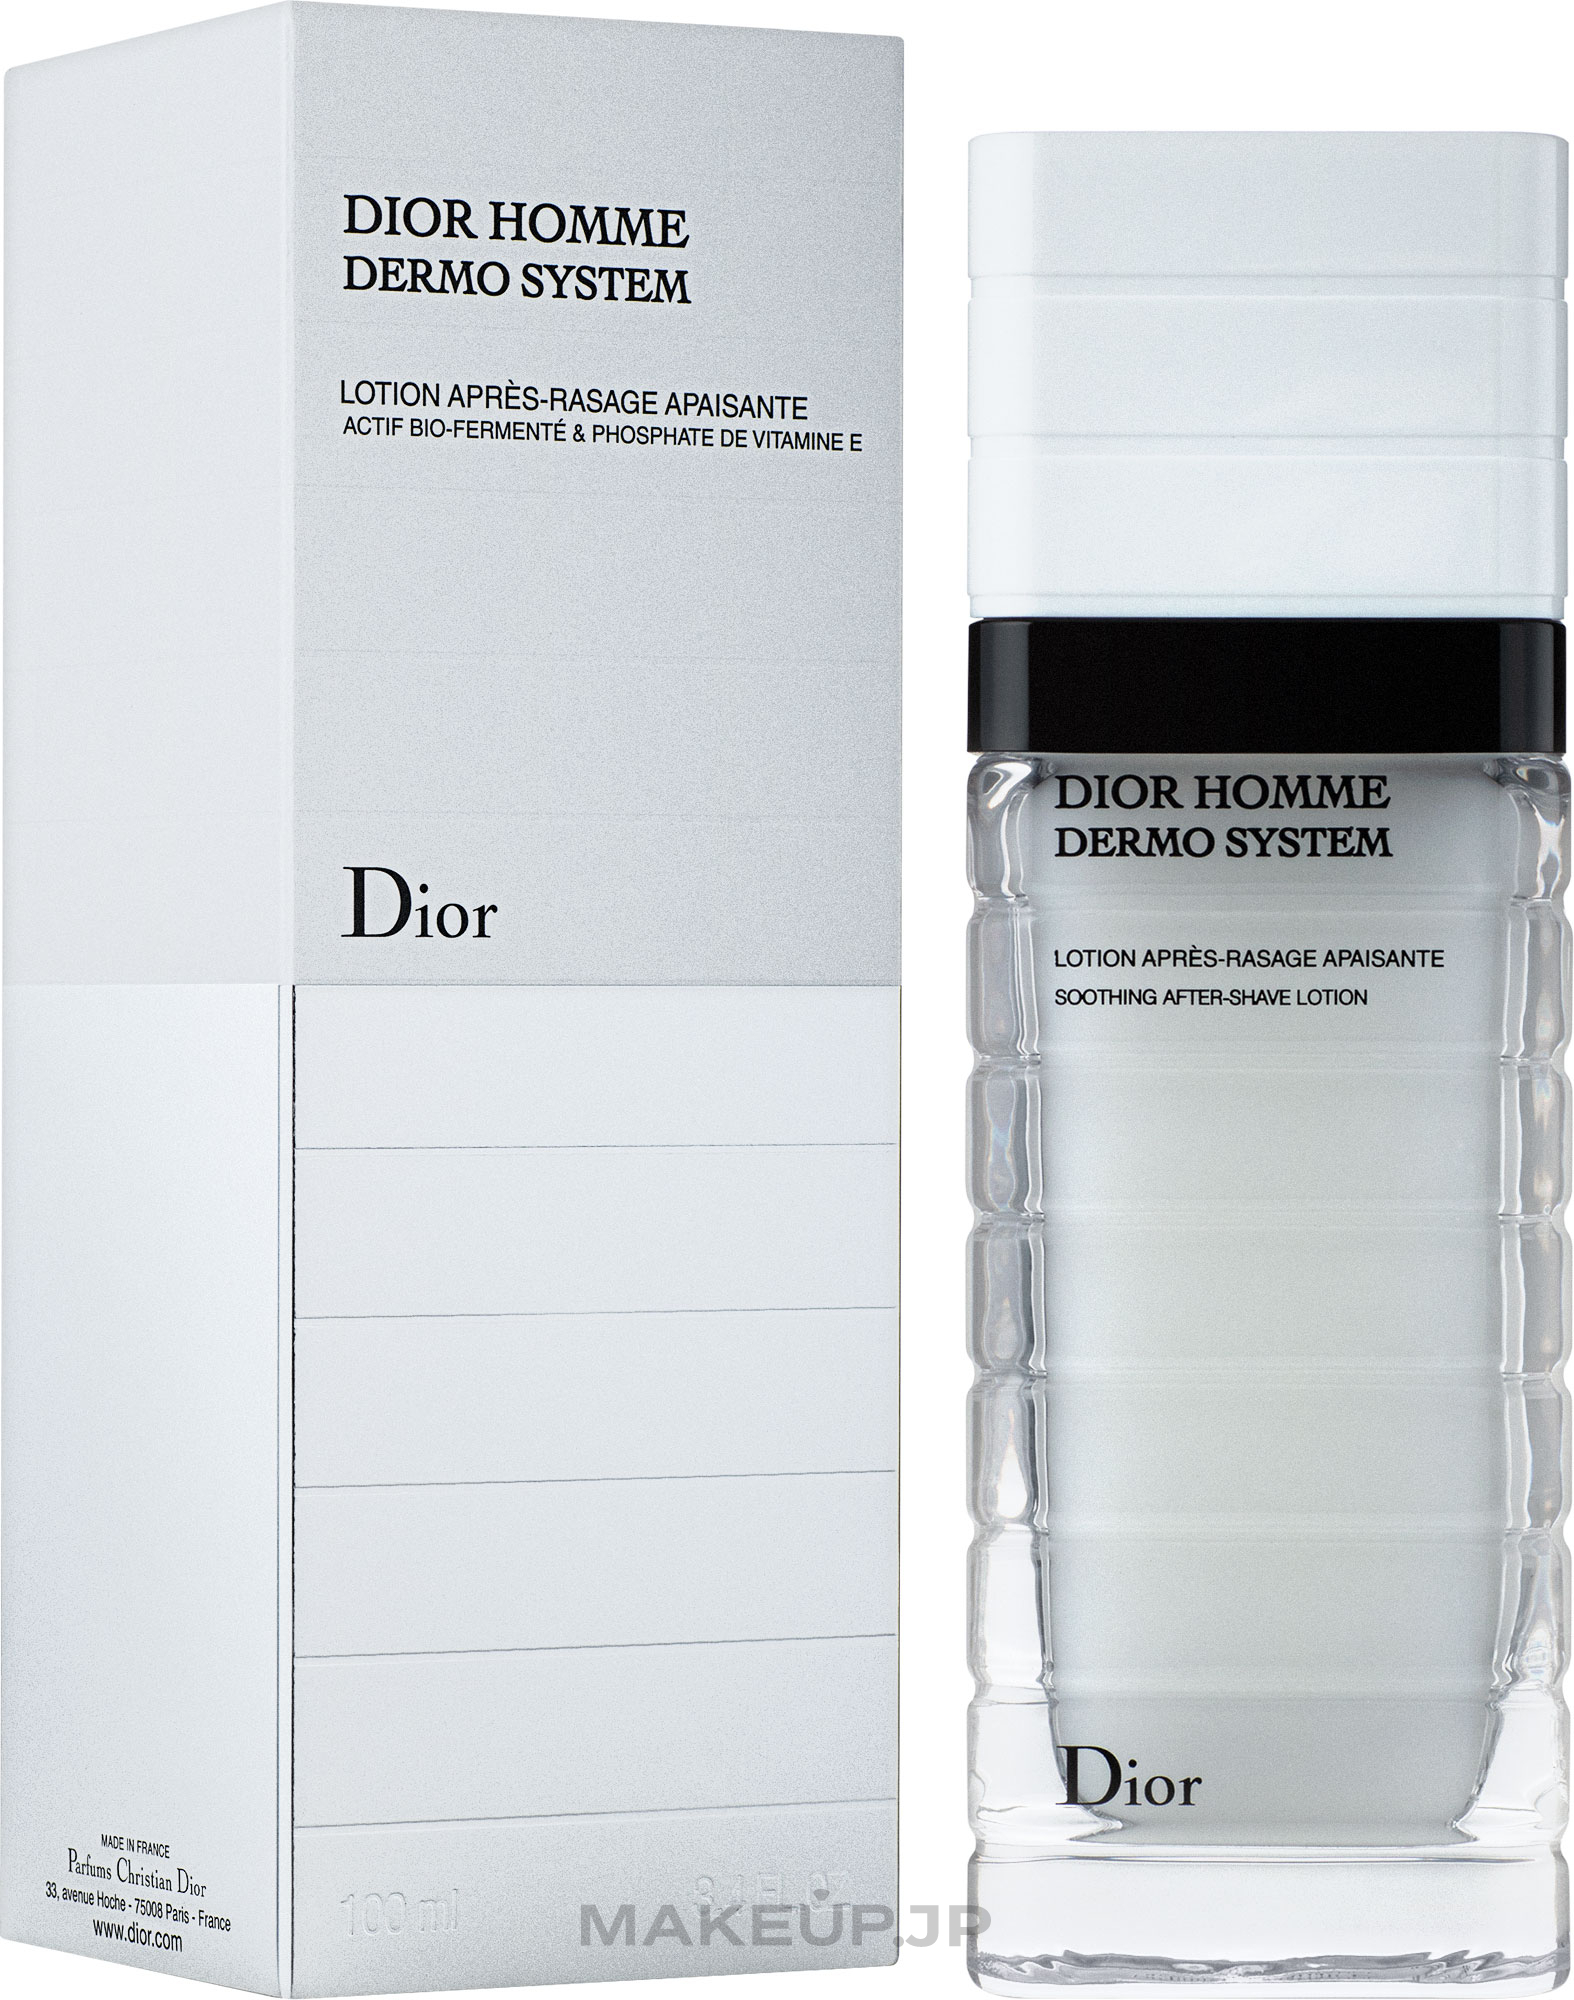 Moisturizing Face Lotion - Dior Homme Dermo System Repairing After-Shave Lotion 100ml — photo 100 ml